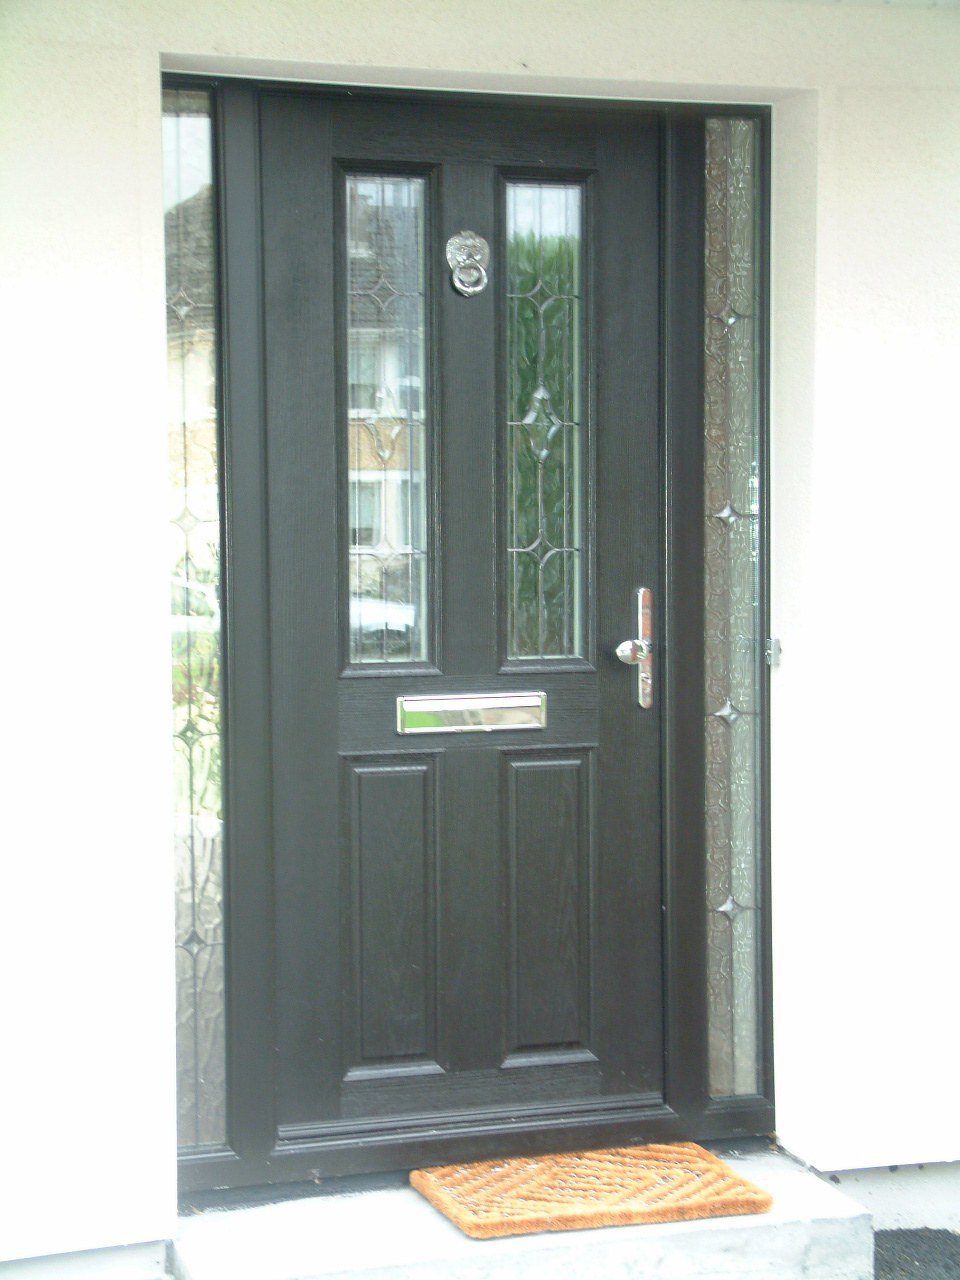 BLACK APEER COMPOSITE FRONT DOOR FITTED BY ASGARD WINDOWS IN DUBLIN.